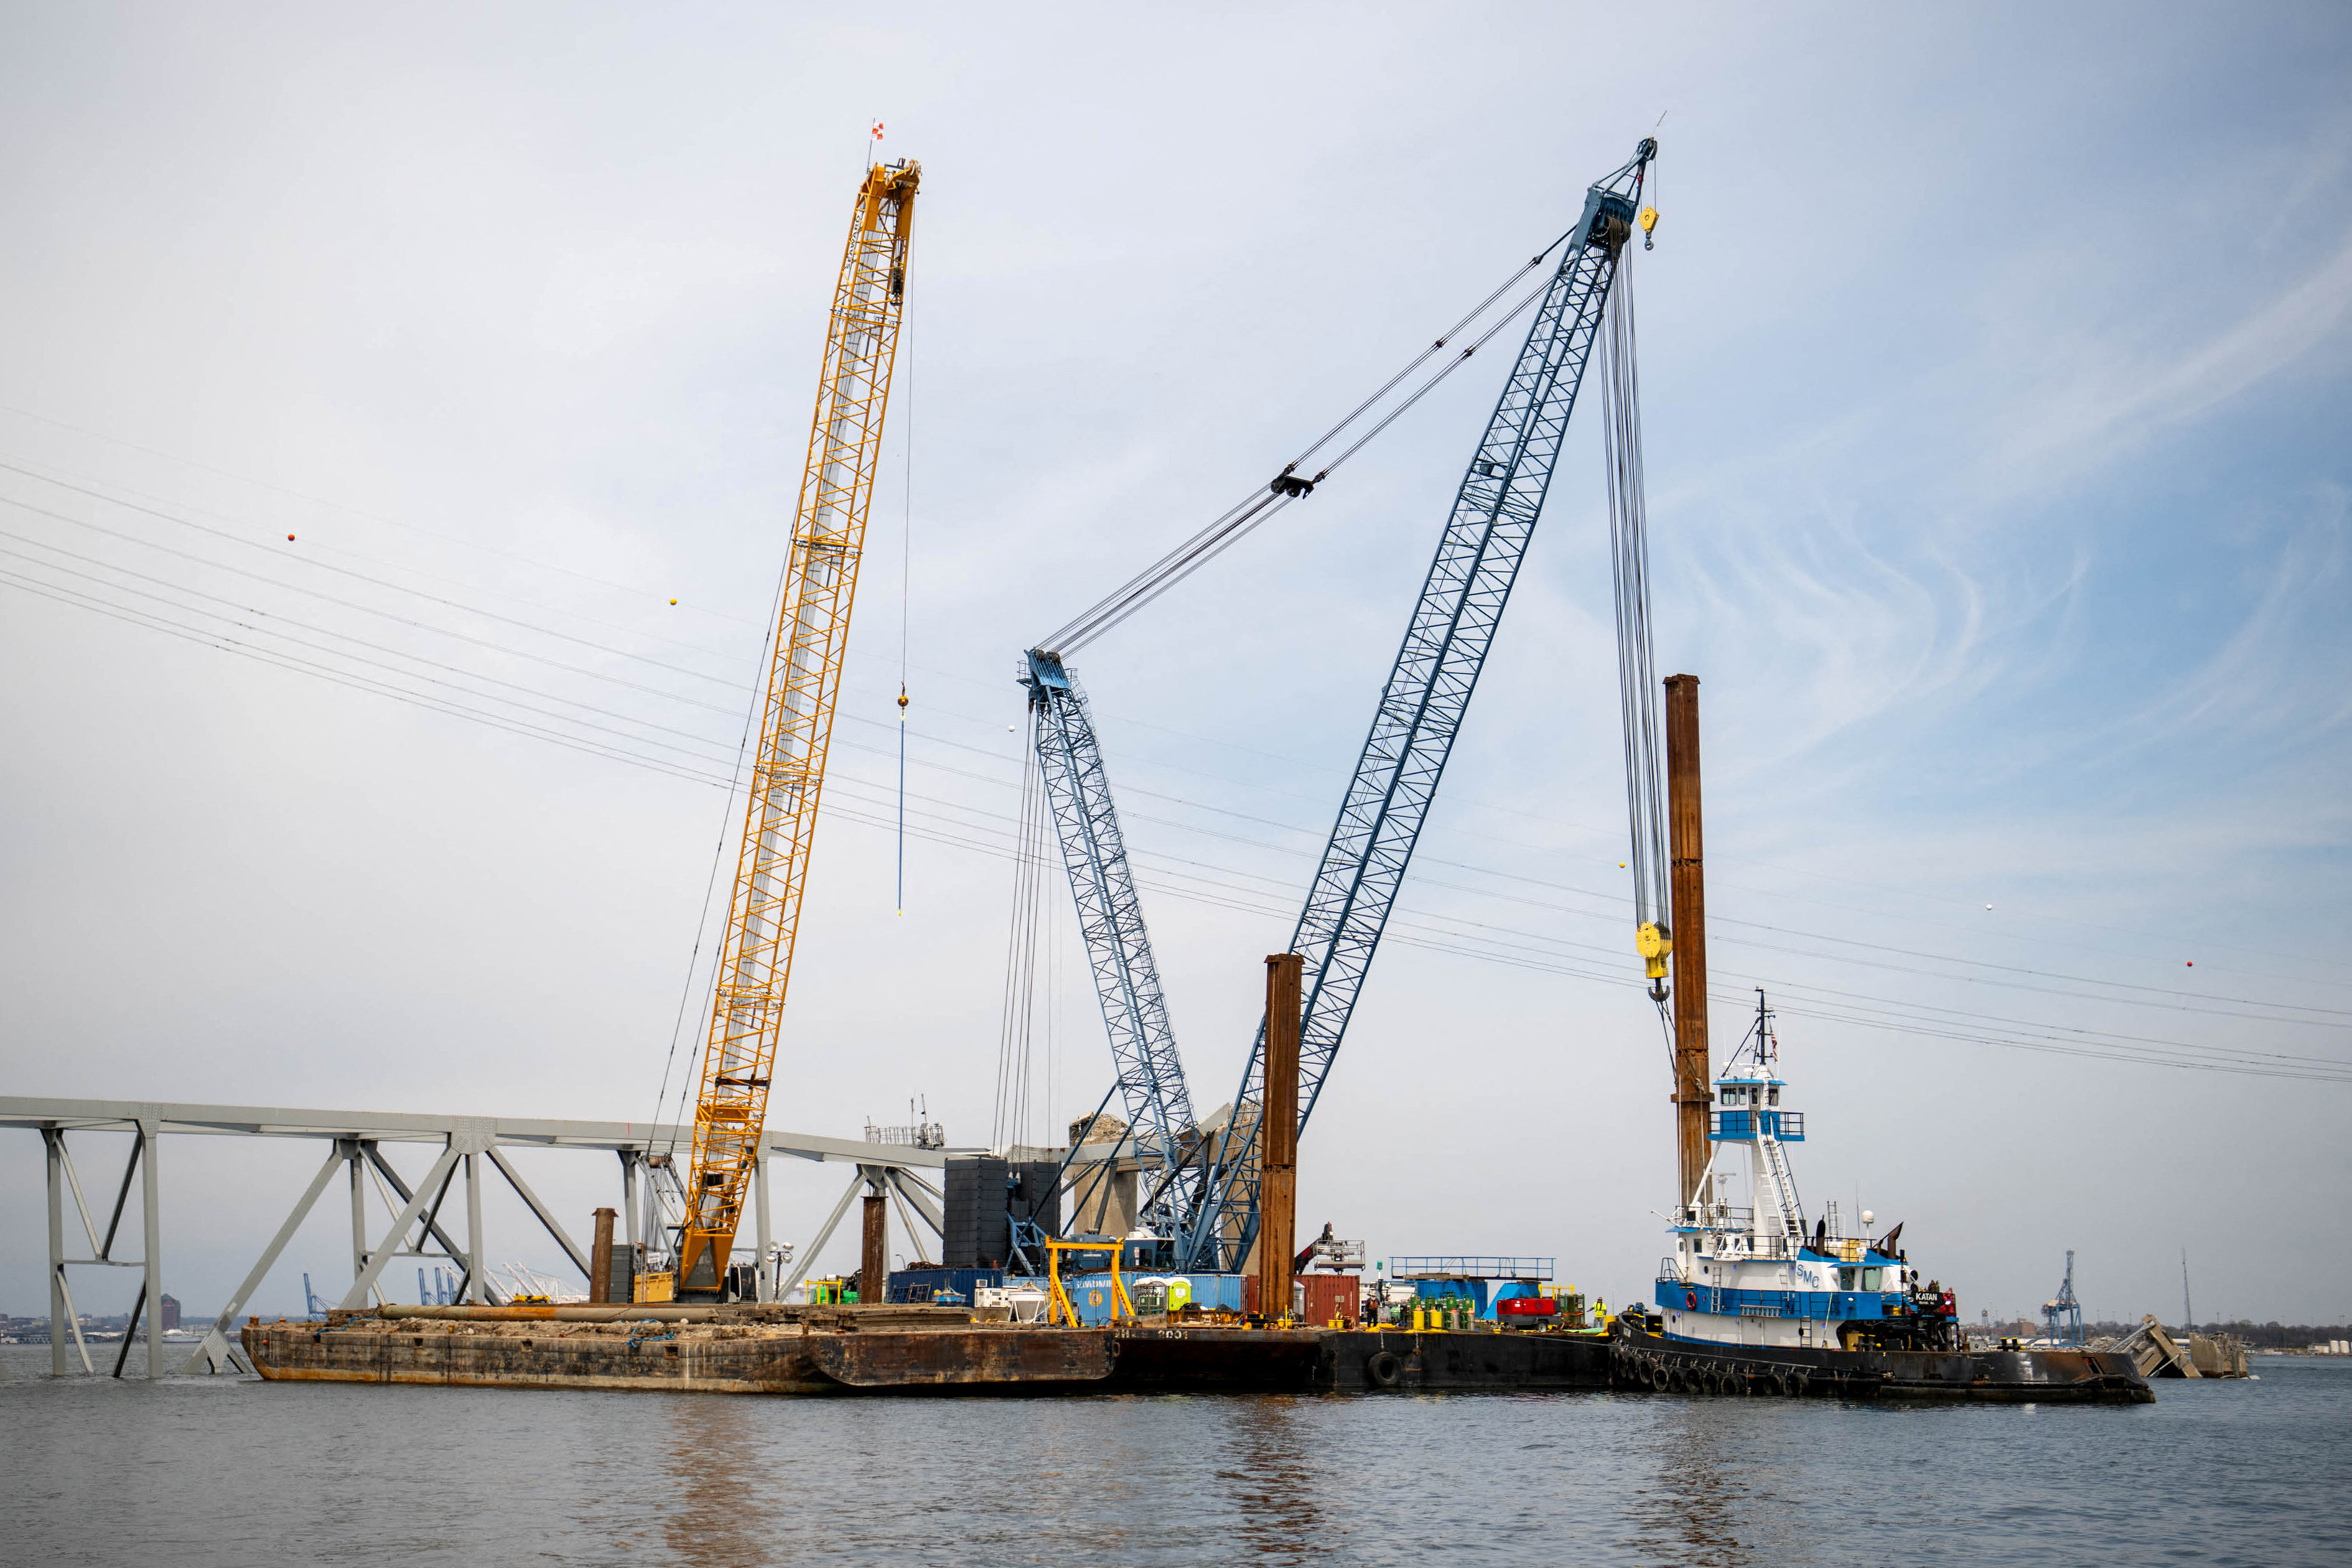 Barge cranes are shown near the collapsed Francis Scott Key Bridge in Baltimore